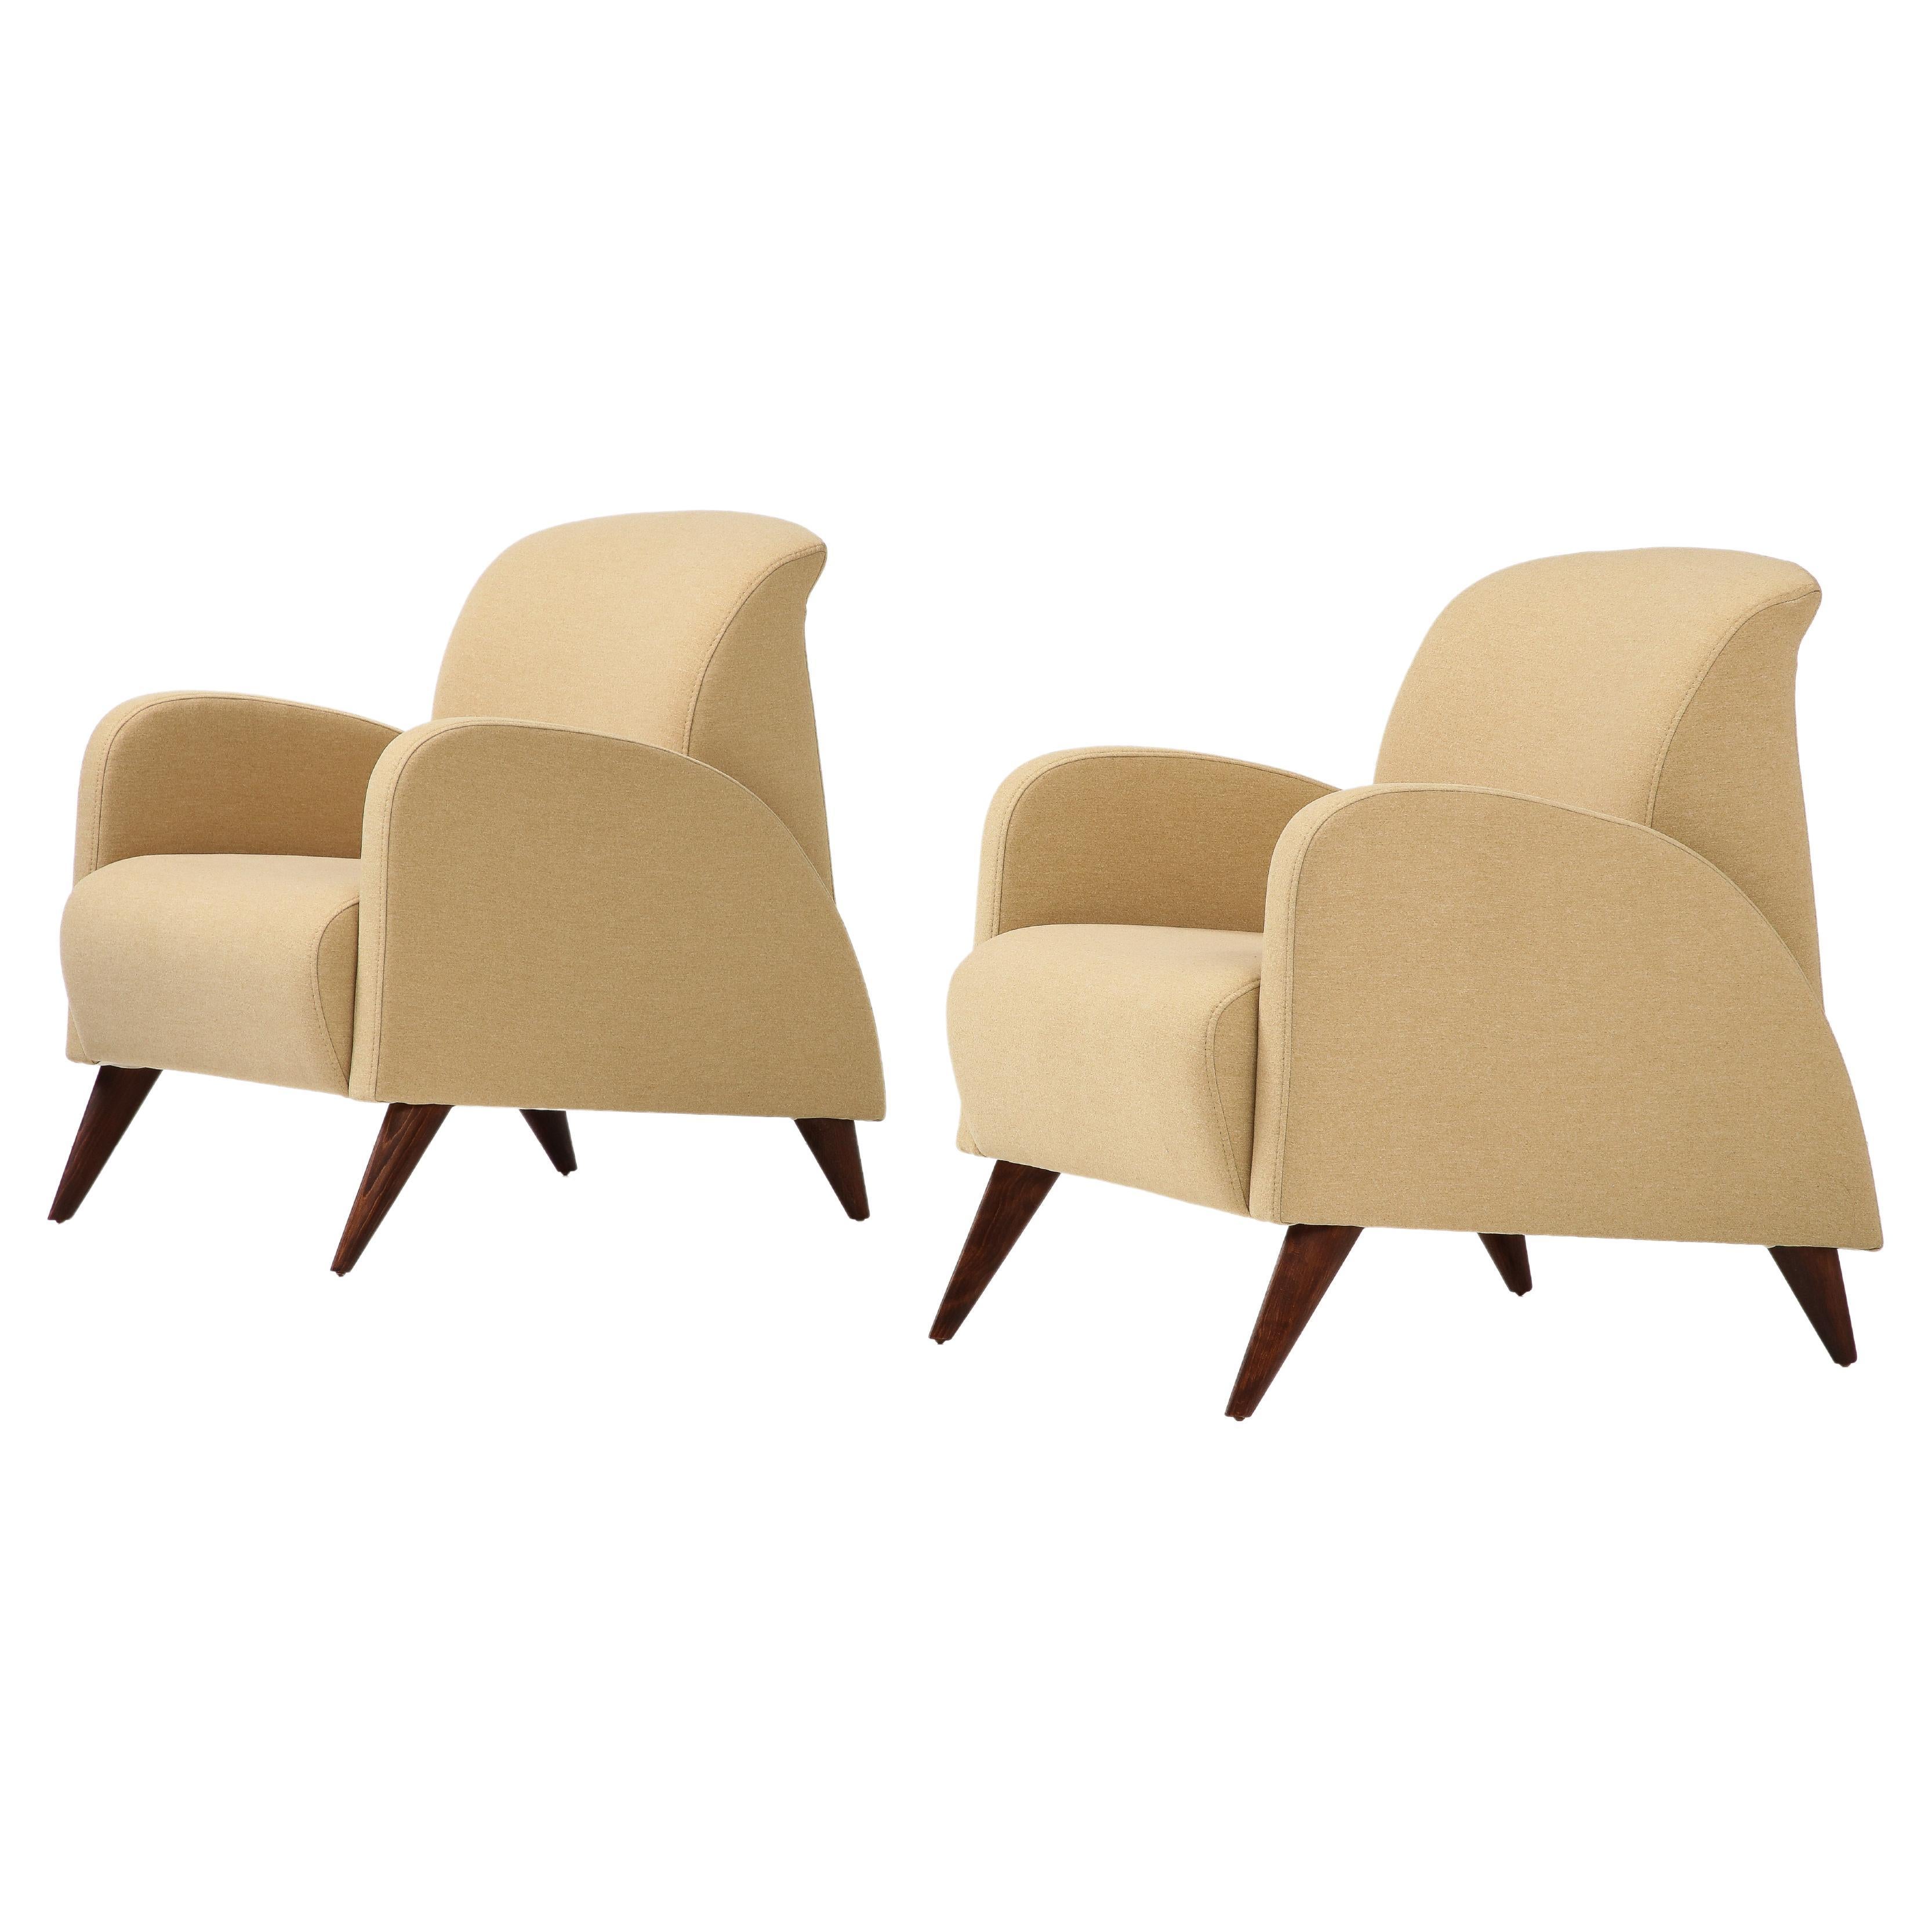 A pair of Italian Art Deco armchairs; the form highly sculptural and streamlined, highly indicative of the glamorous, stylized and dynamic Art Deco period, the seats supported on elegantly splayed walnut legs. Newly re-upholstered and re-finished in